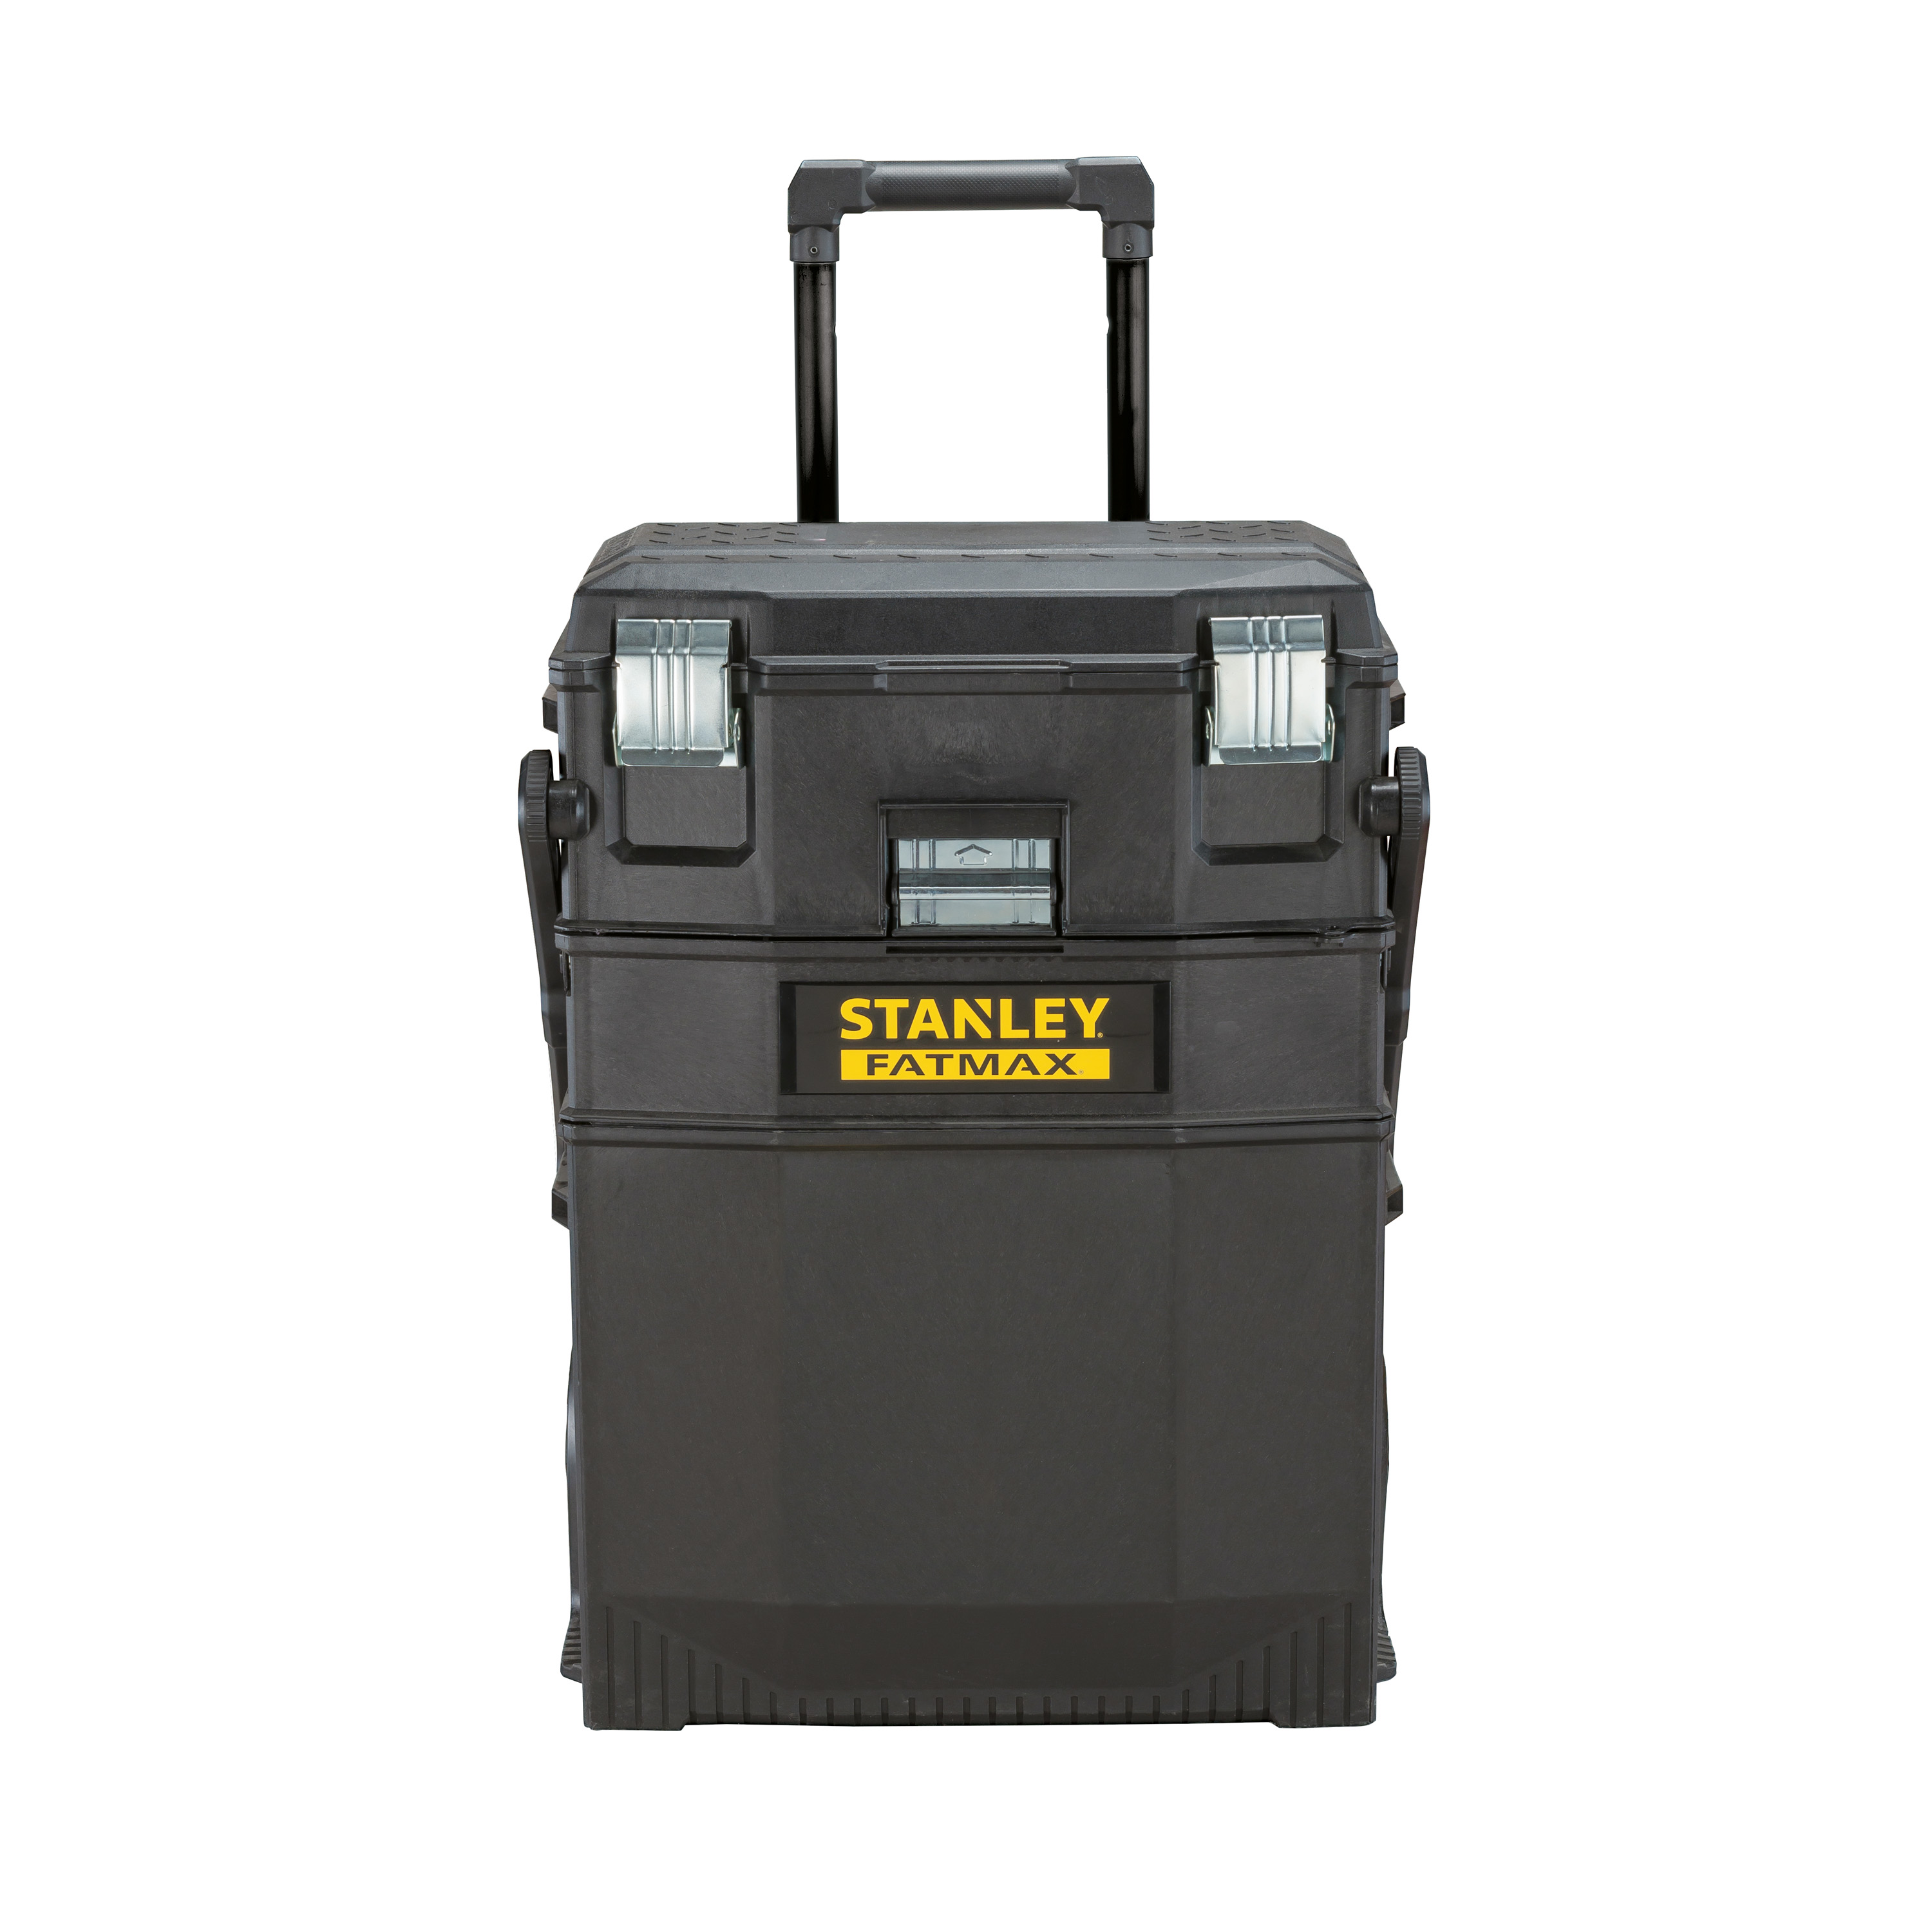 STANLEY FATMAX 020800R 4-in-1 Mobile Work Station - image 3 of 28